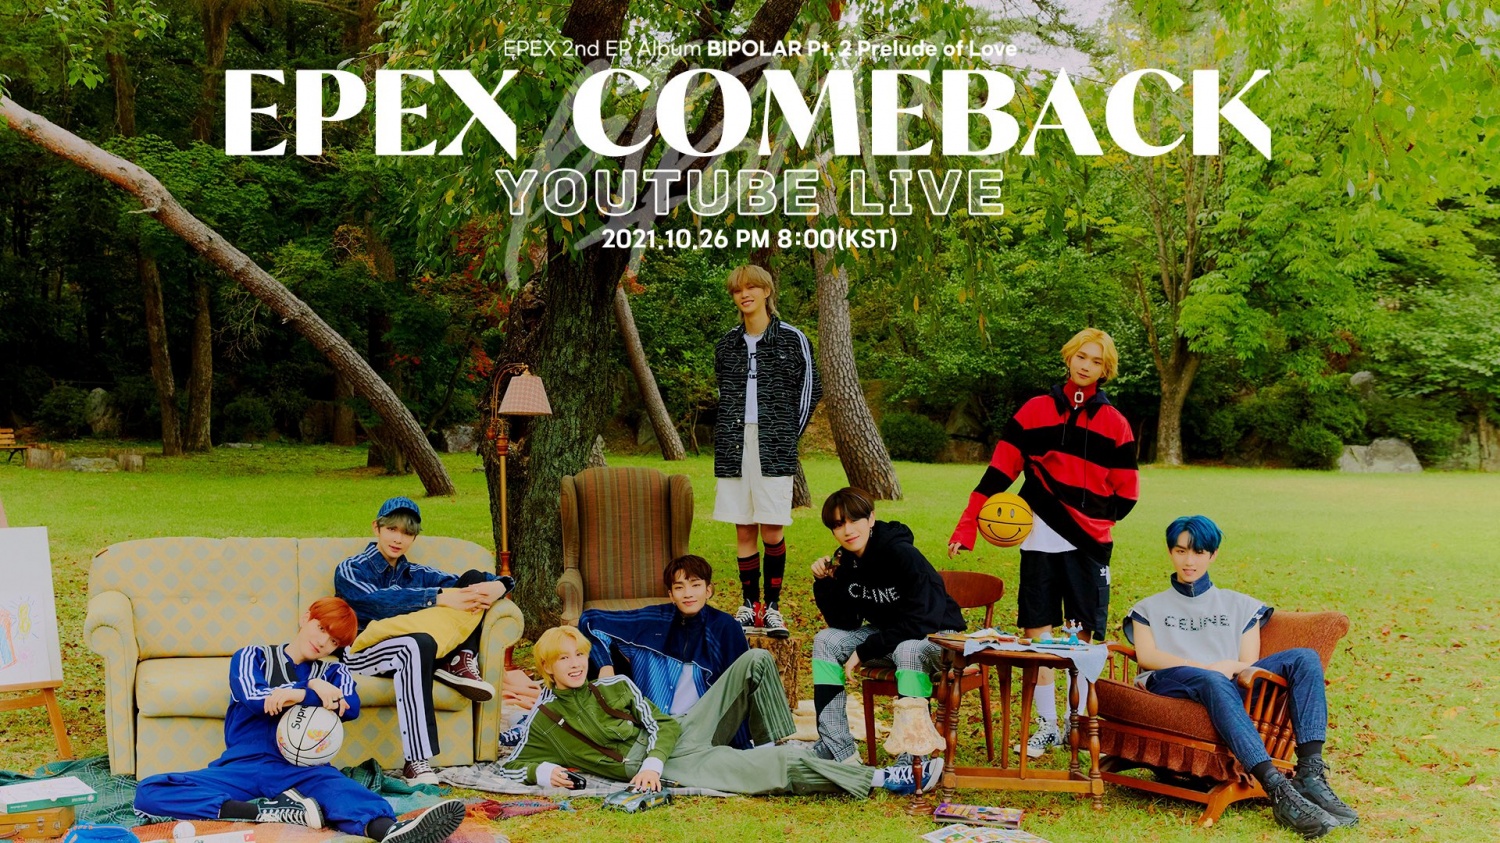 EPEX "First comeback after debut, nervous and nervous, but excited"